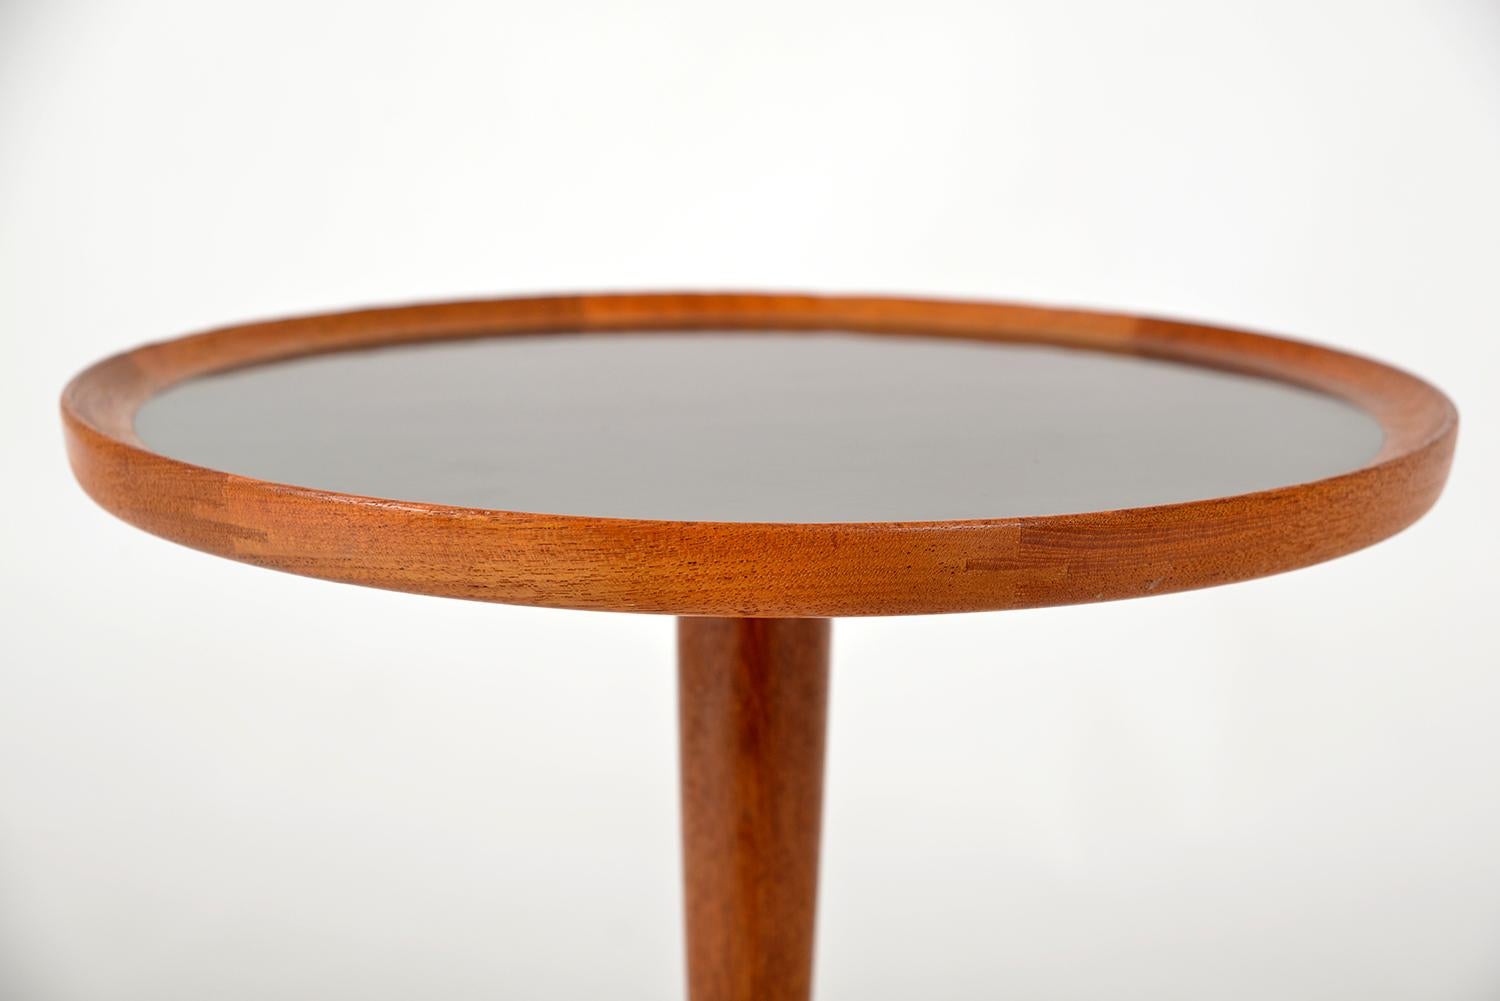 20th Century 1960s Danish Modern Teak Occasional Side Wine Table by Hans C Andersen for Artex For Sale